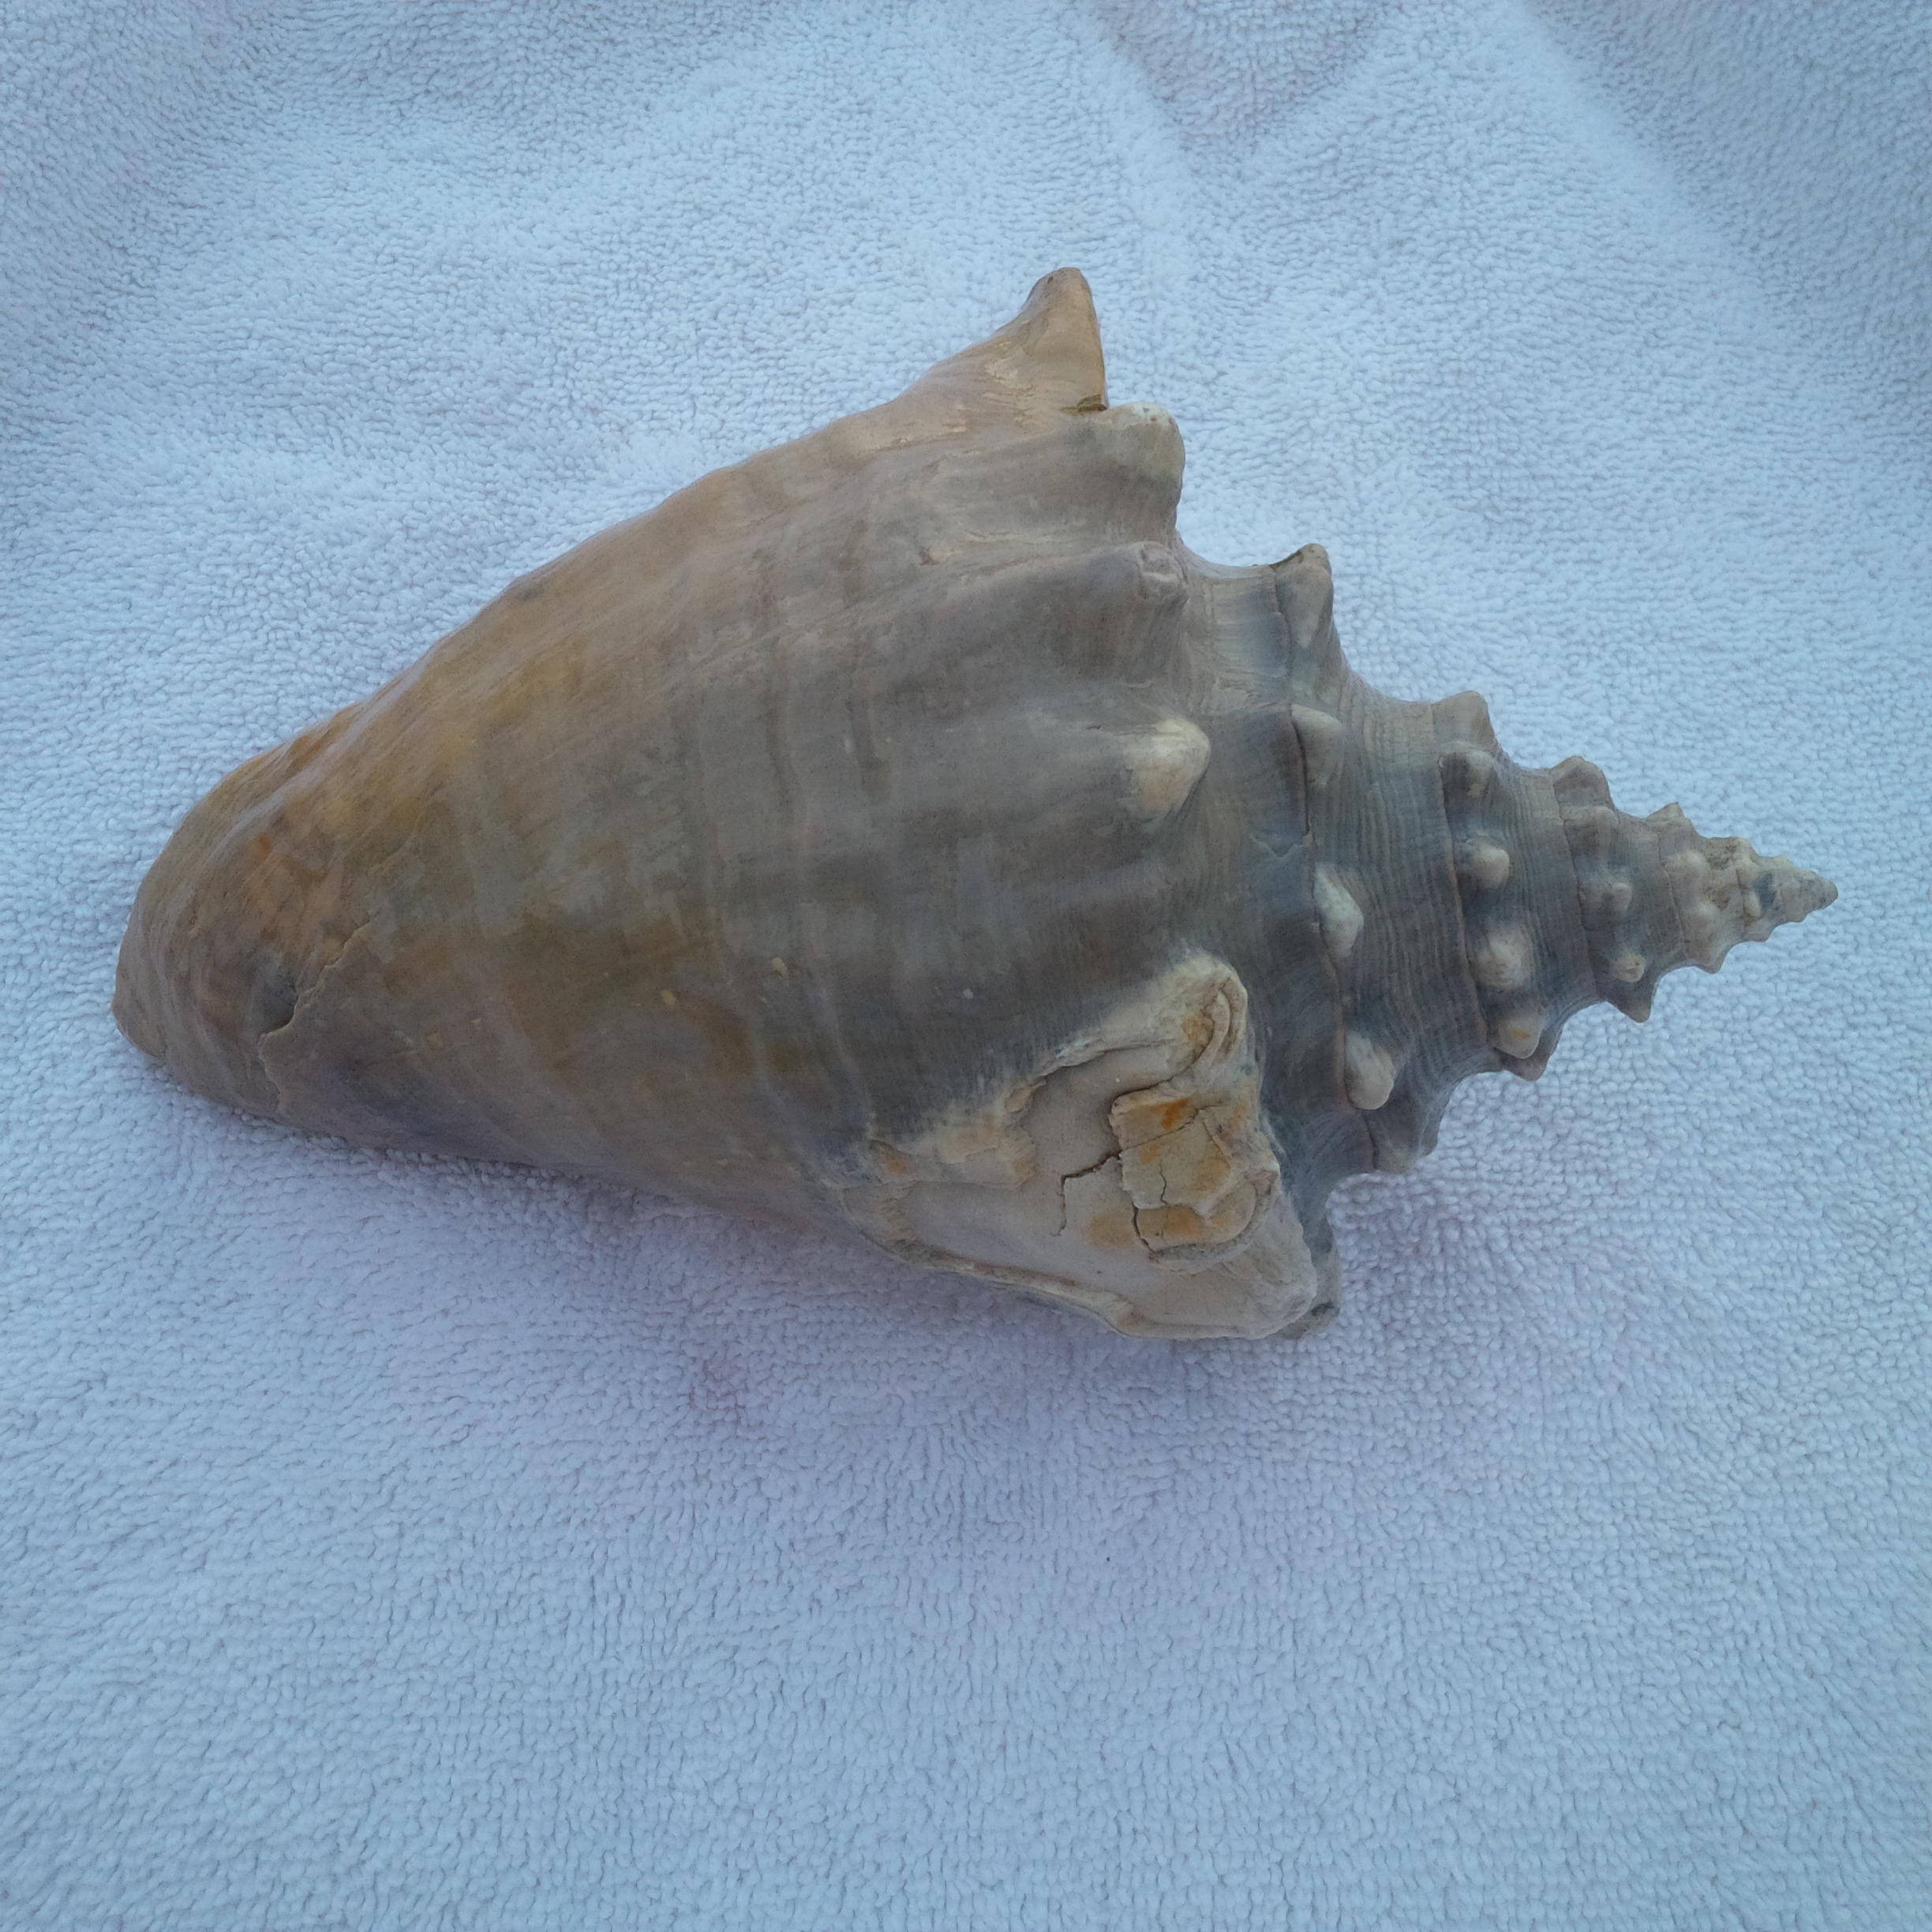 New     Conch shell 9x5x4 inches aquarium decoration with...